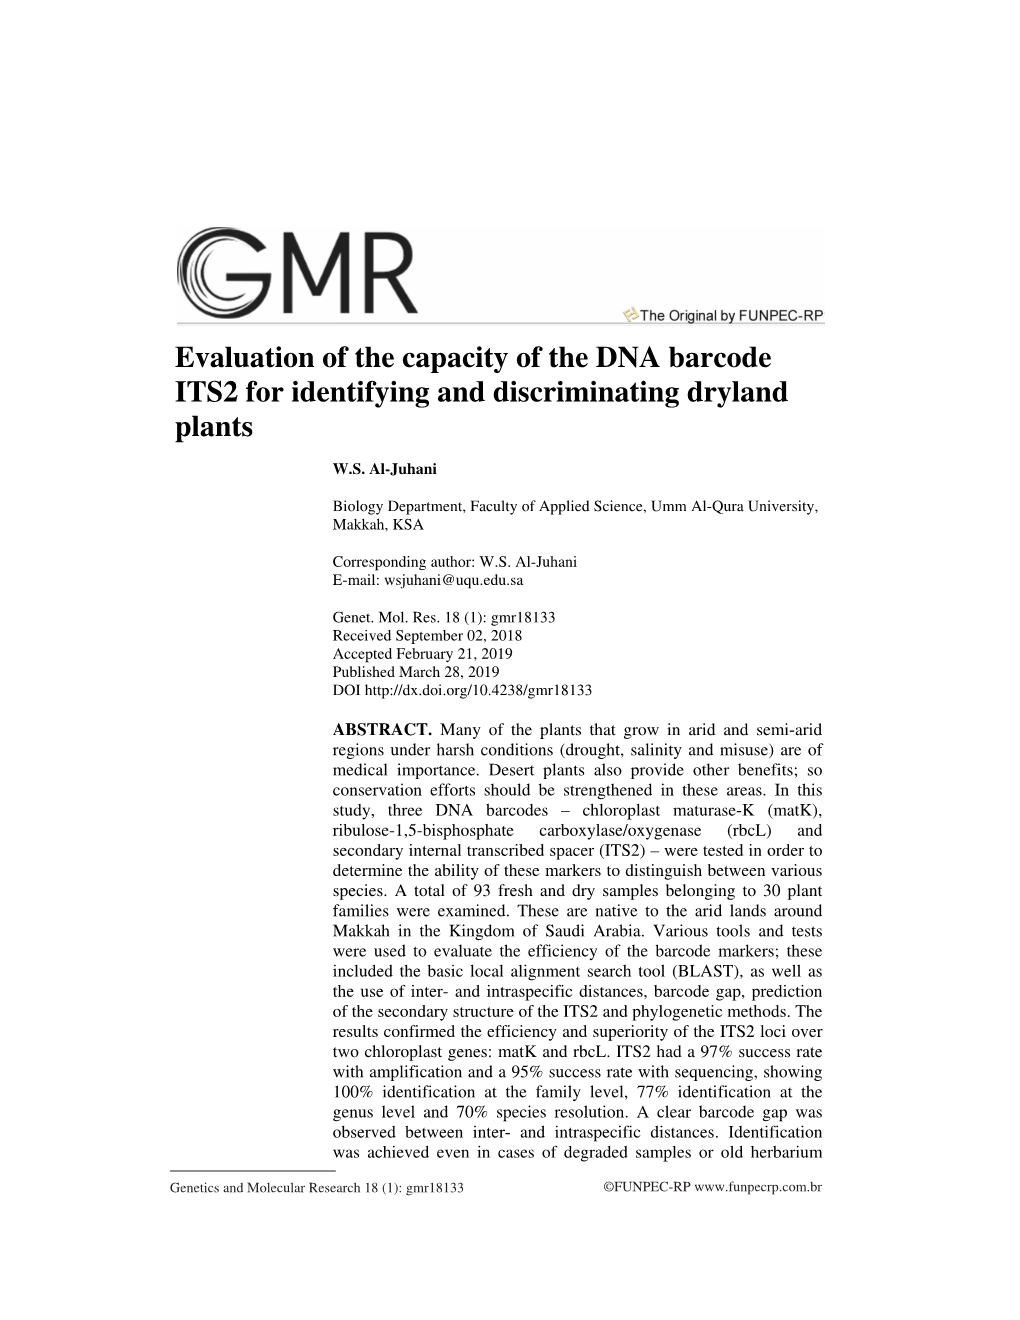 Gmr18133 Received September 02, 2018 Accepted February 21, 2019 Published March 28, 2019 DOI